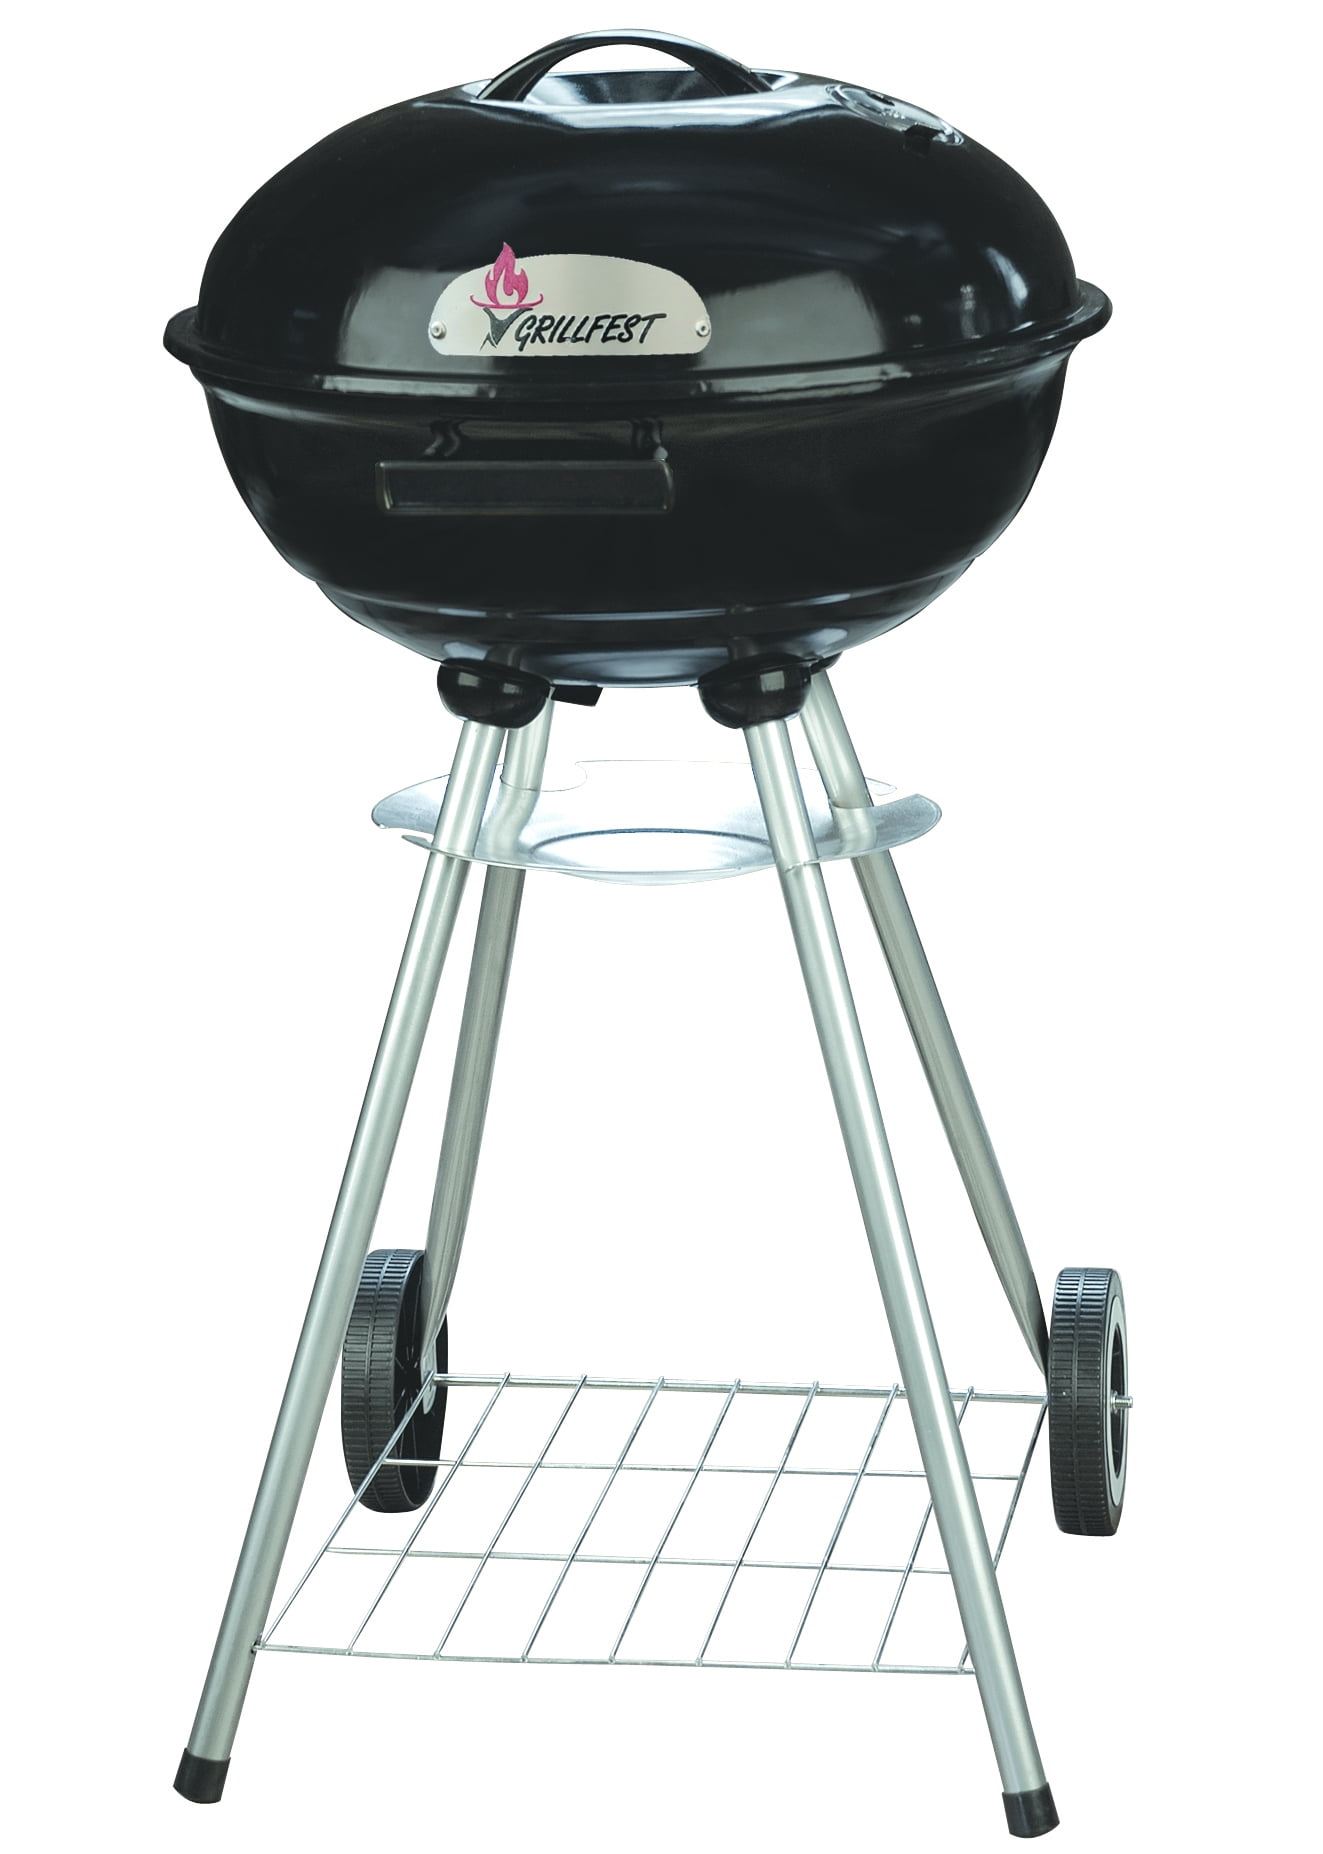 BBQtime BBQ time/Portable Charcoal Grill/Hot Air/Active Ventilation/Fast Start/Smoke Free/usb Port/Carrying Bag/39 cm Diameter/20 cm Height